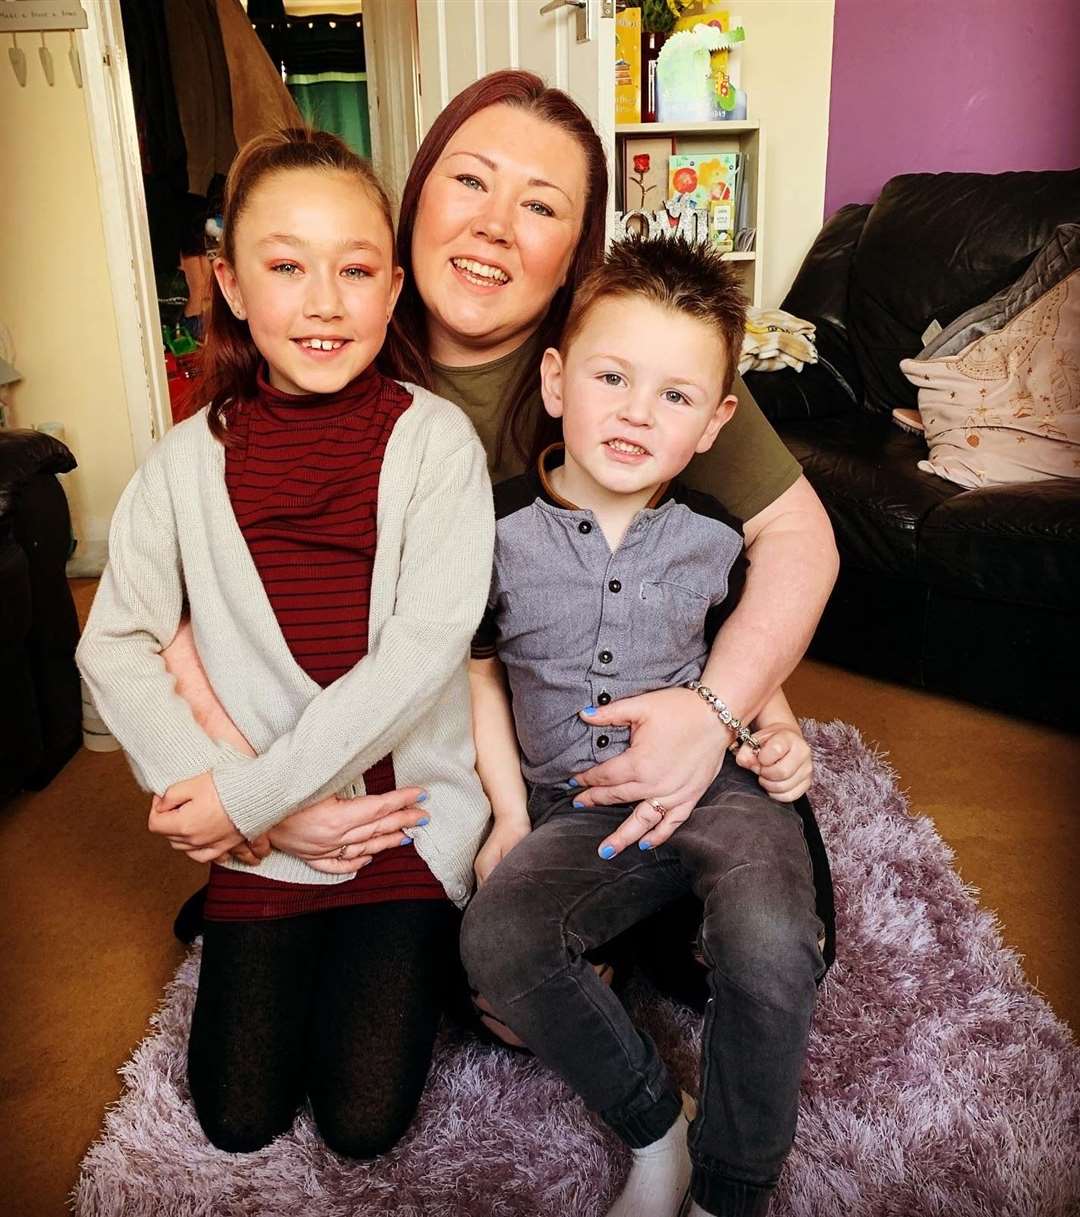 Amie Pritchard, 30, with her children Evie, 7 and Finley, 4